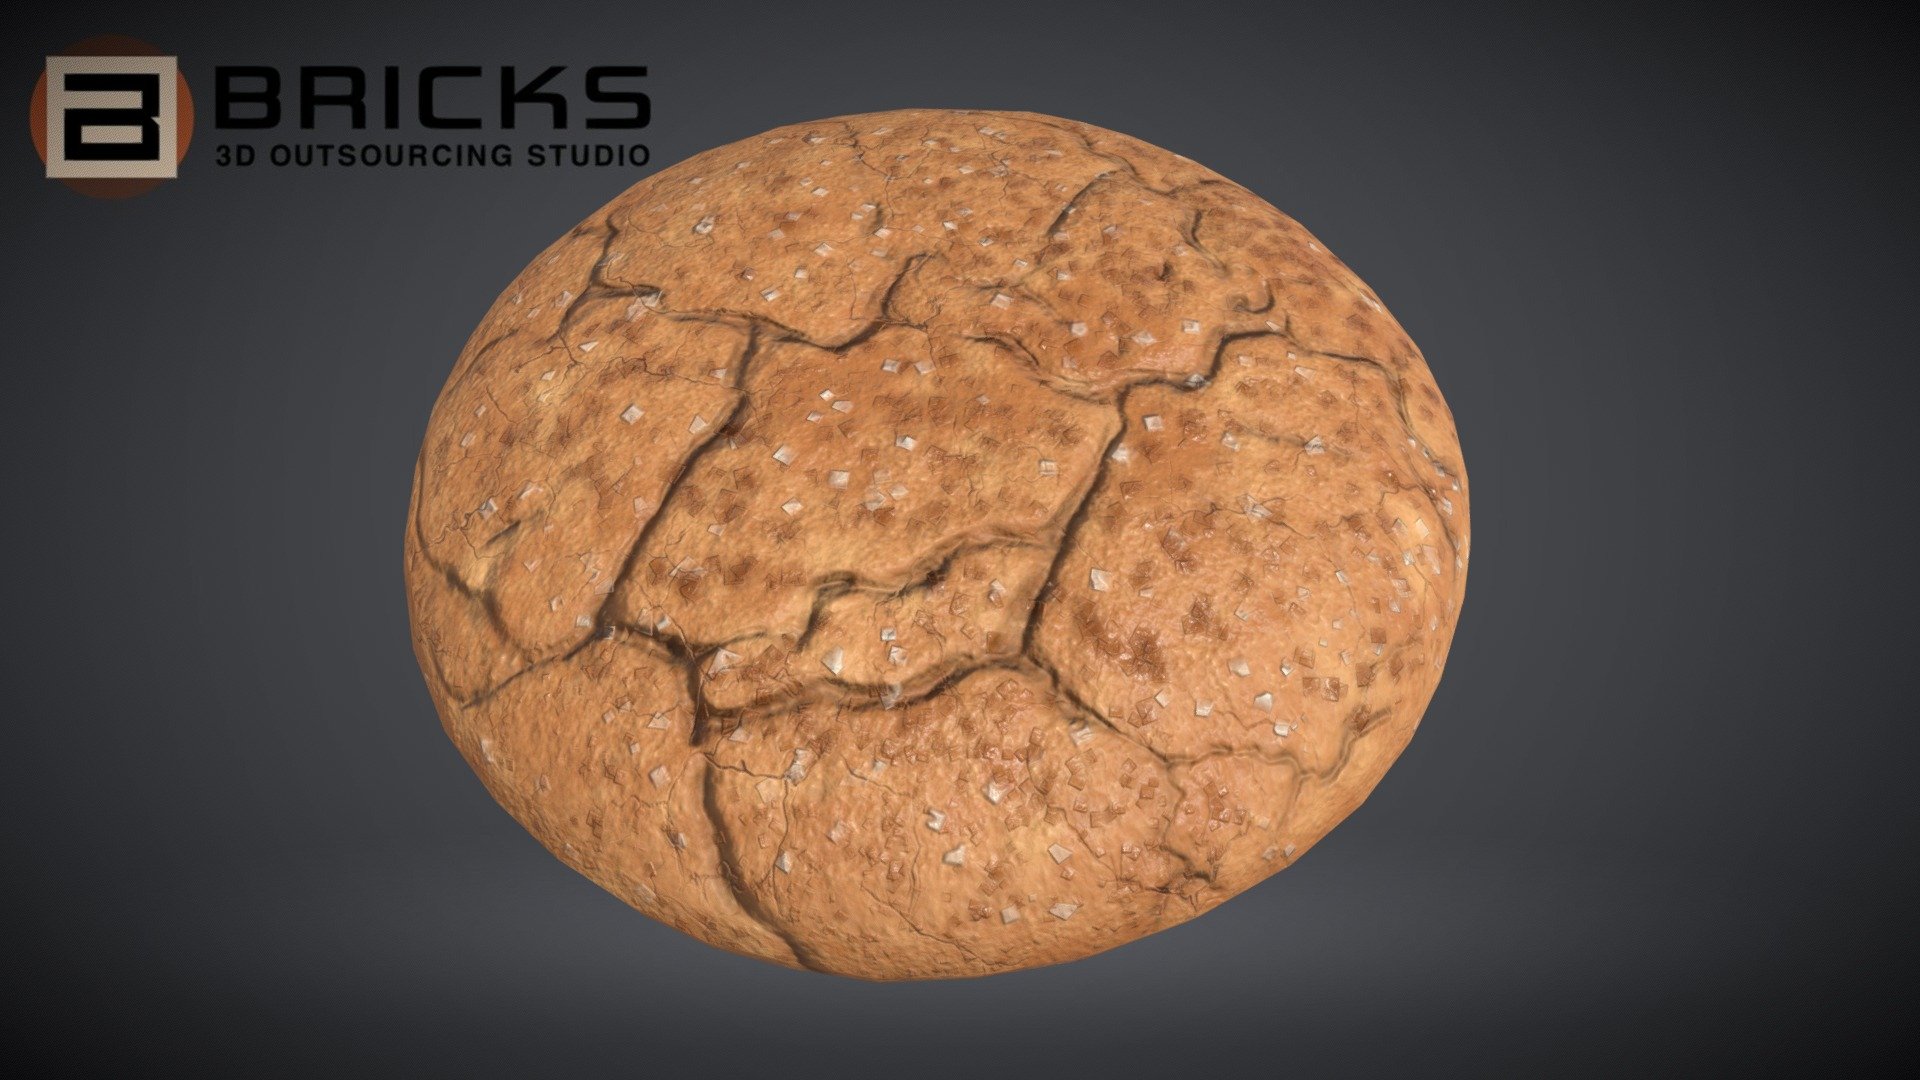 PBR Food Asset:
CookieMolasses
Polycount: 1200
Vertex count: 663
Texture Size: 2048px x 2048px
Normal: OpenGL

If you need any adjust in file please contact us: team@bricks3dstudio.com

Hire us: tringuyen@bricks3dstudio.com
Here is us: https://www.bricks3dstudio.com/
        https://www.artstation.com/bricksstudio
        https://www.facebook.com/Bricks3dstudio/
        https://www.linkedin.com/in/bricks-studio-b10462252/ - Cookie Molasses_FBX - Buy Royalty Free 3D model by Bricks Studio (@bricks3dstudio) 3d model